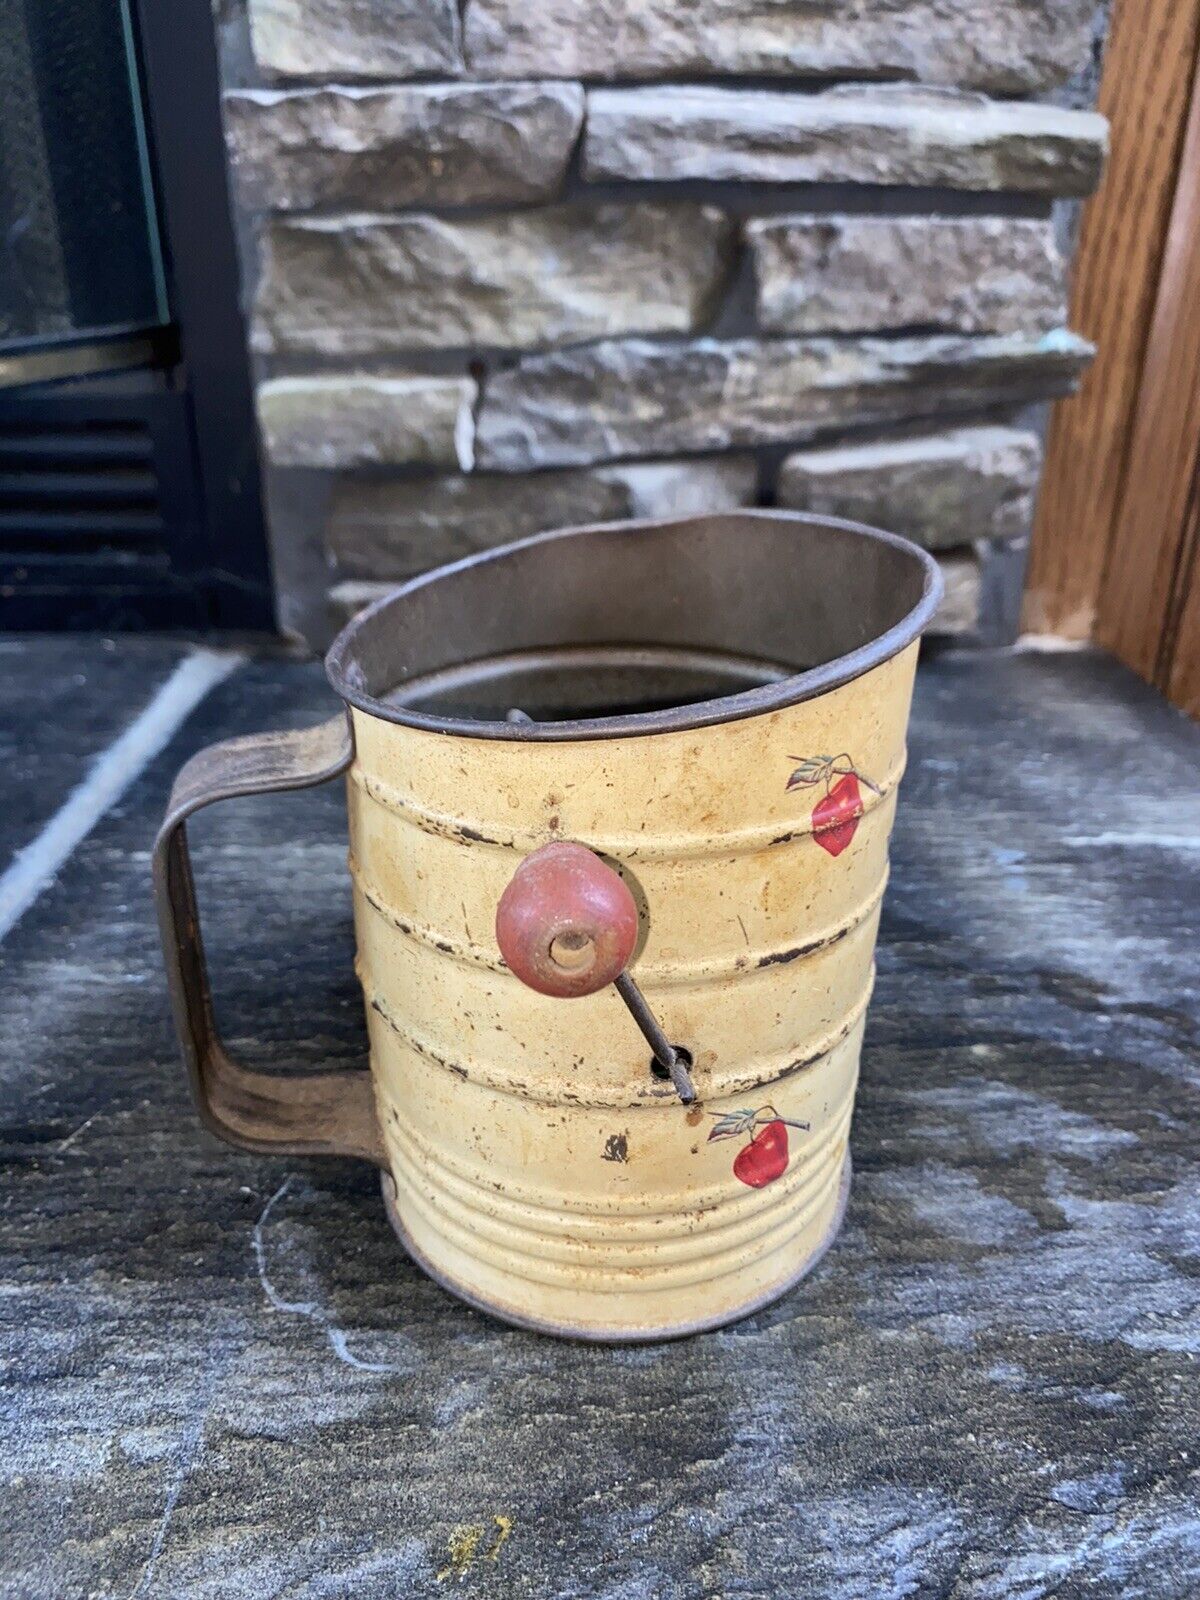 Vintage 50’s USA Bromwell’s Metal Flour Sifter 3-Cup Measuring Beige Red Apple